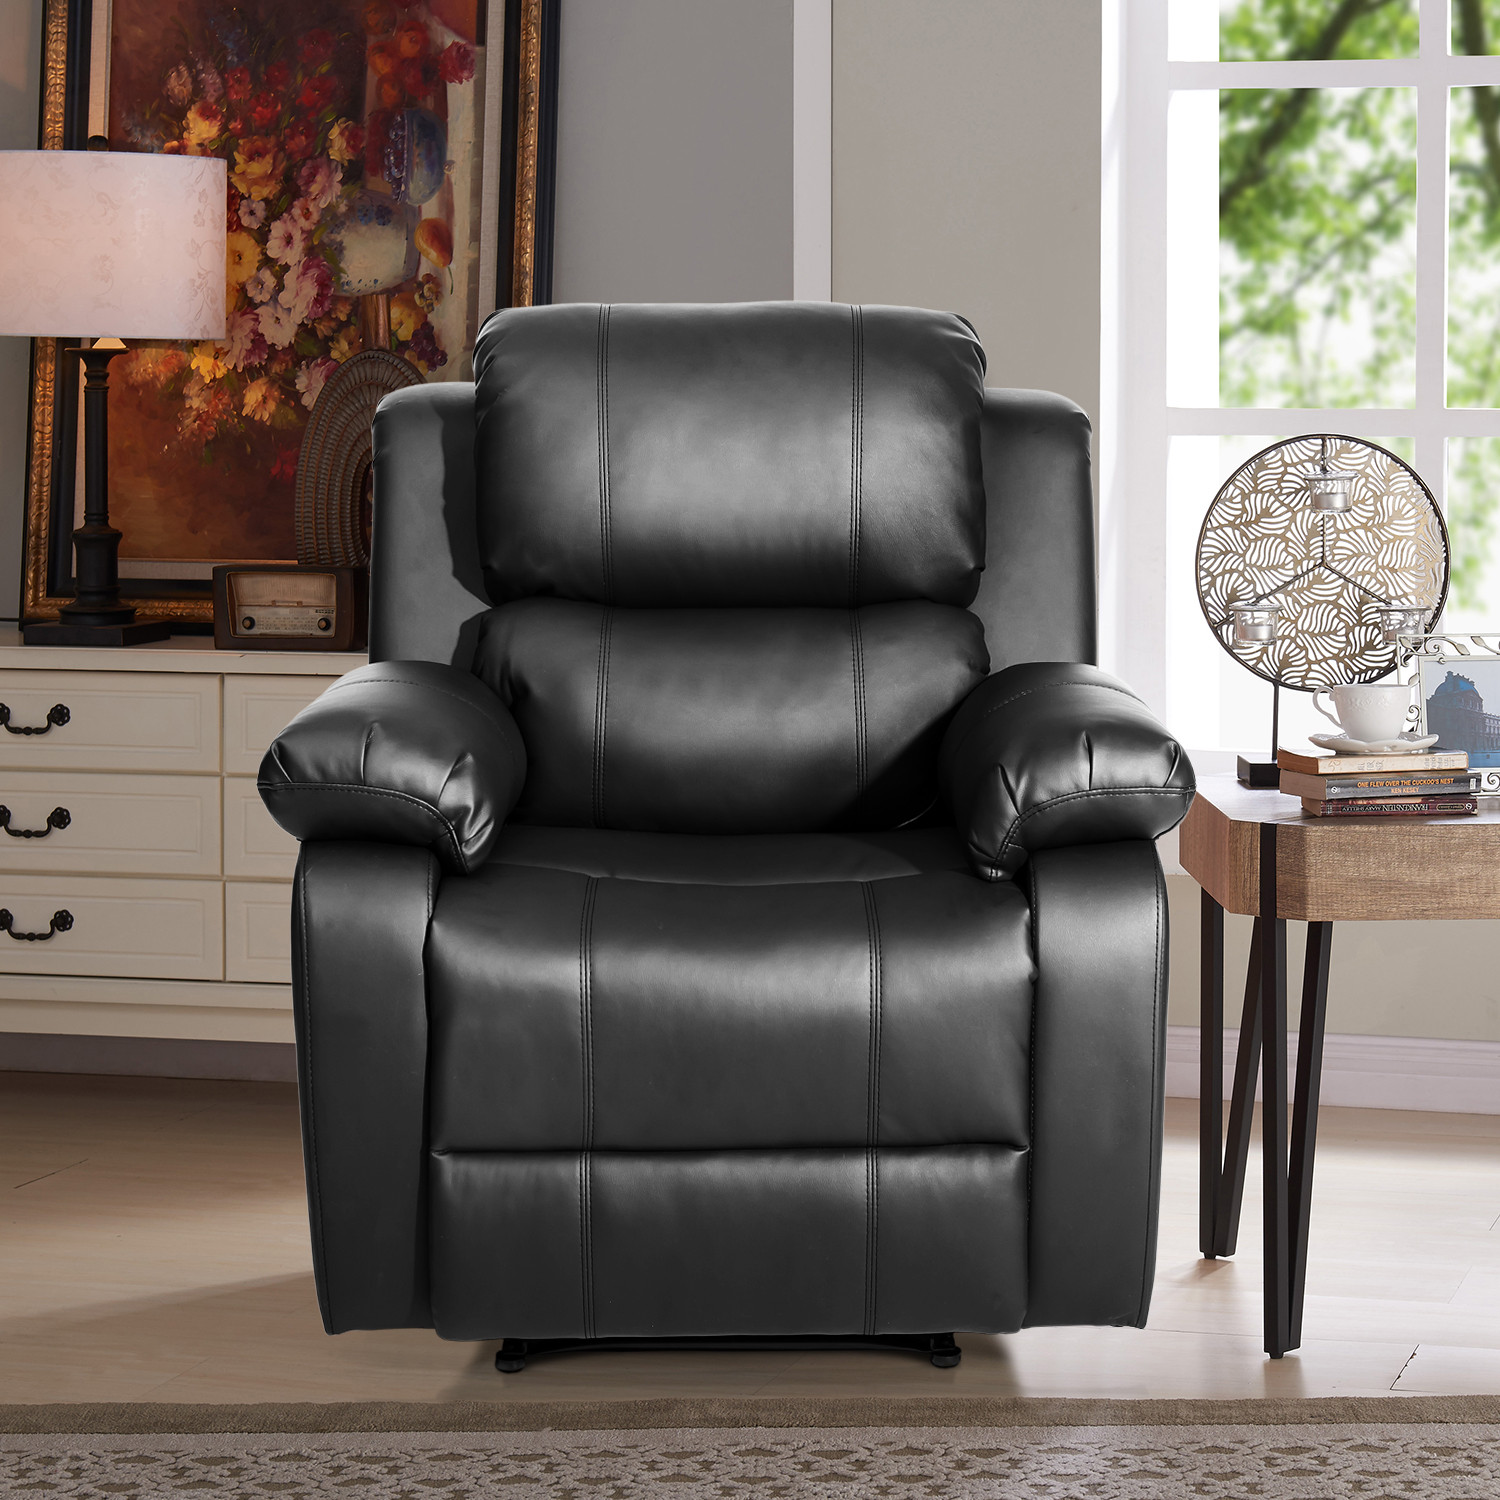 Ergonomic Living Room Chairs
 Clearance Electronic Massage Chair BTMWAY Oversized